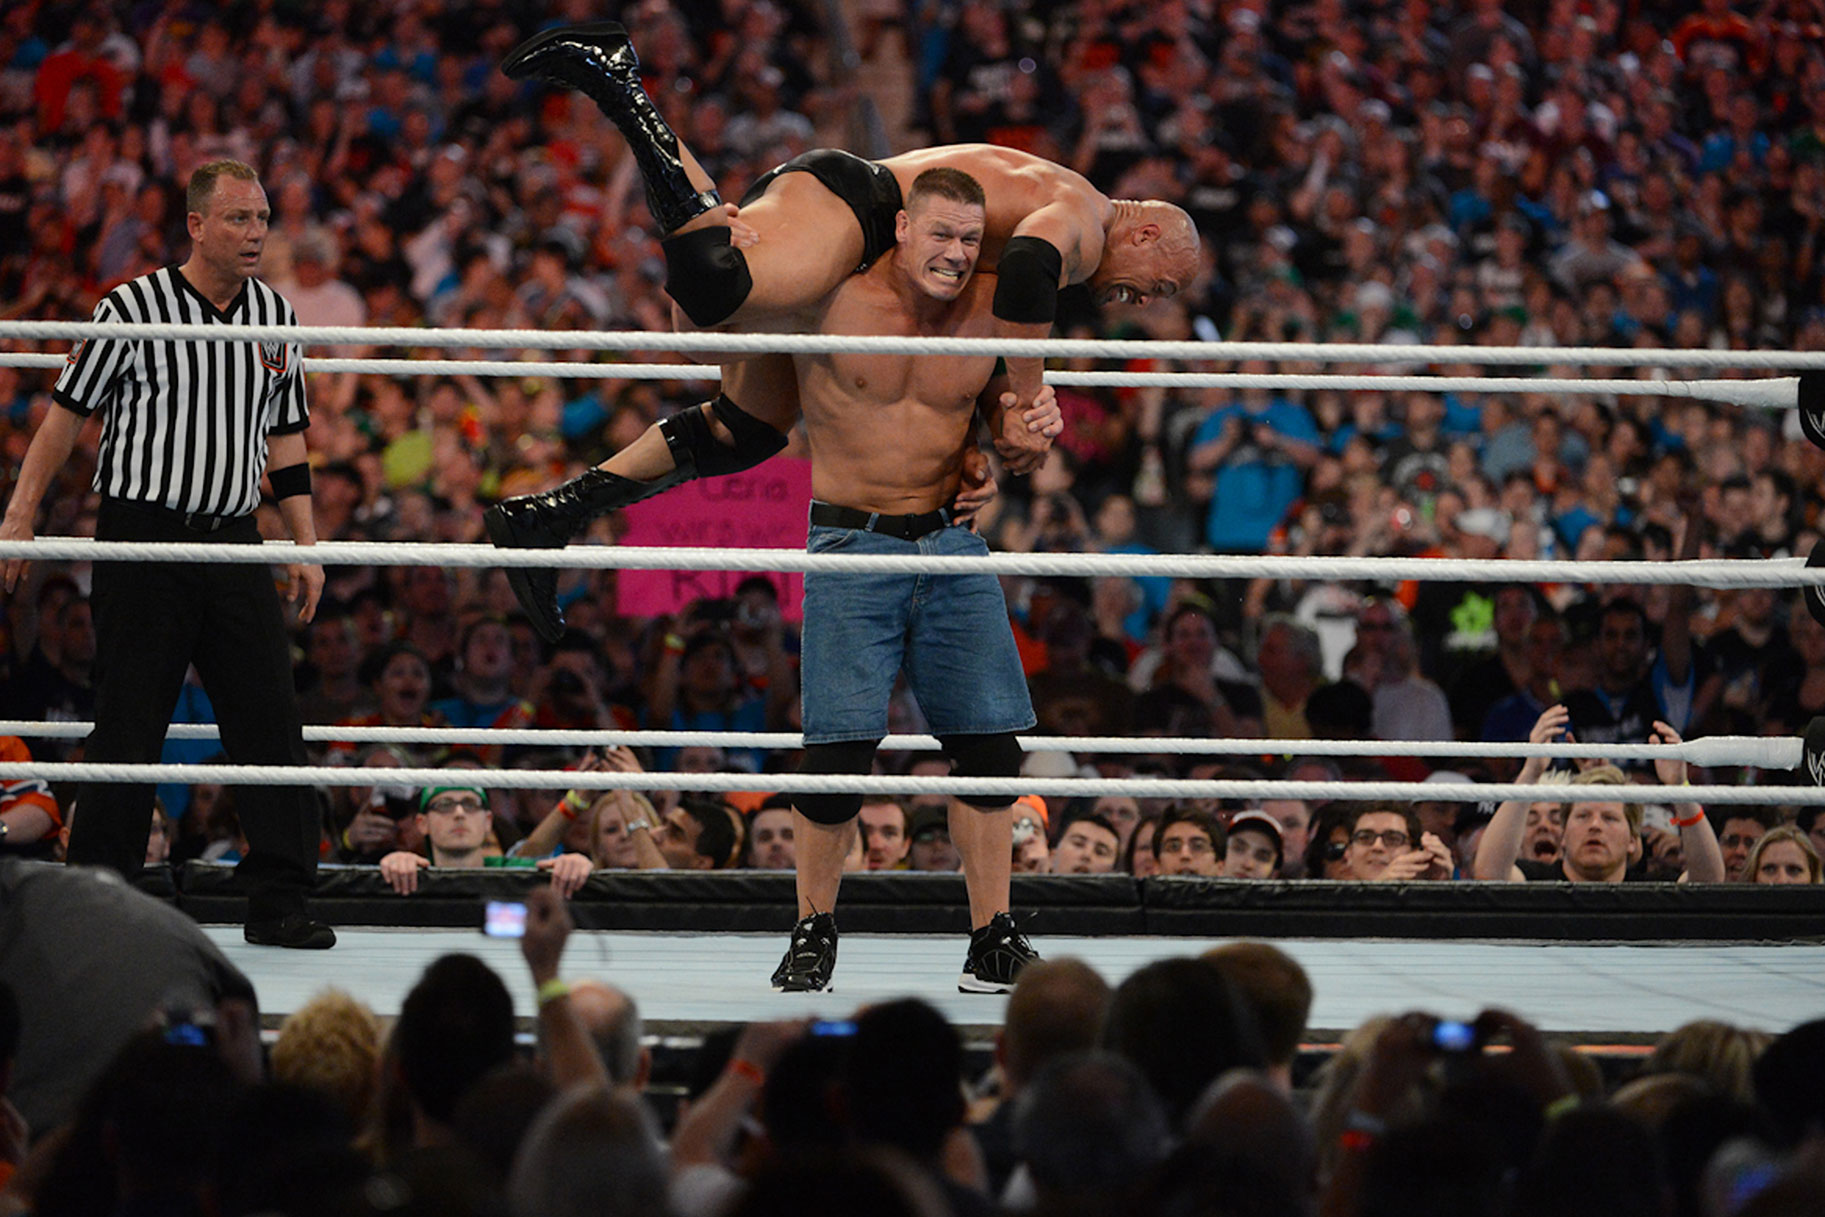 John Cena and The Rock at Wrestlemania in 2012